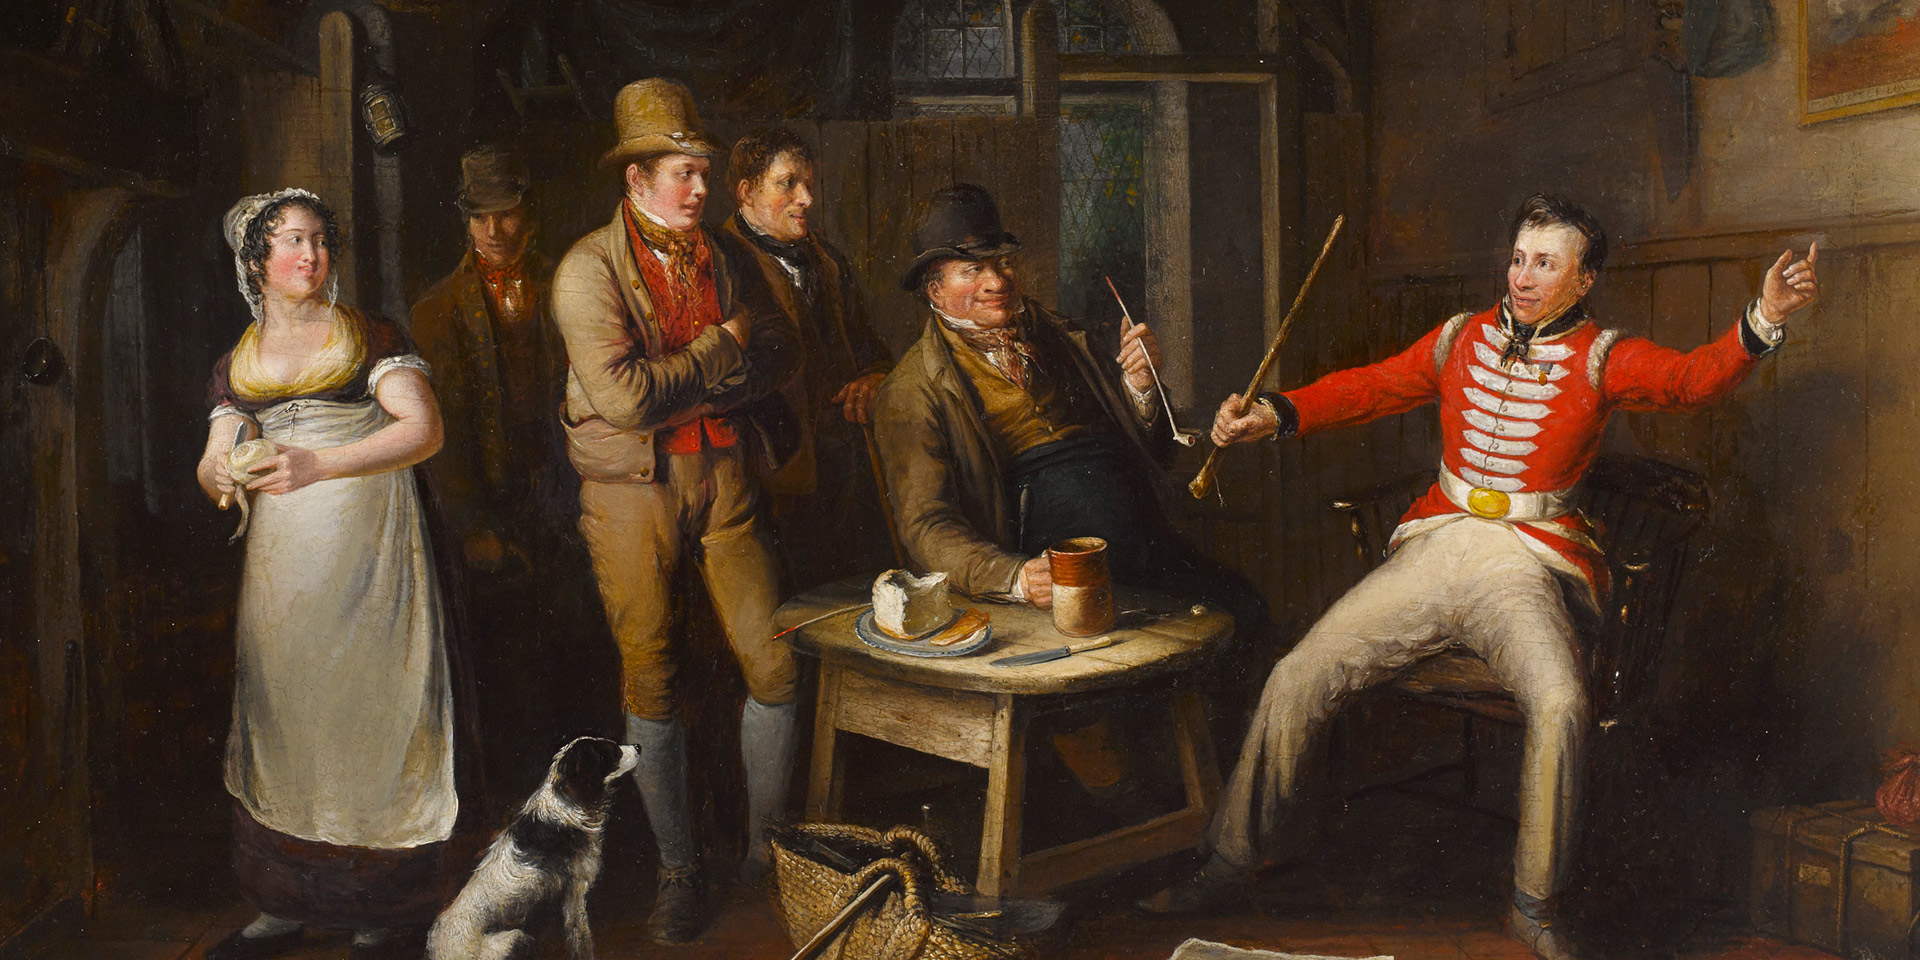 A Soldier relating his exploits in a tavern, 1821